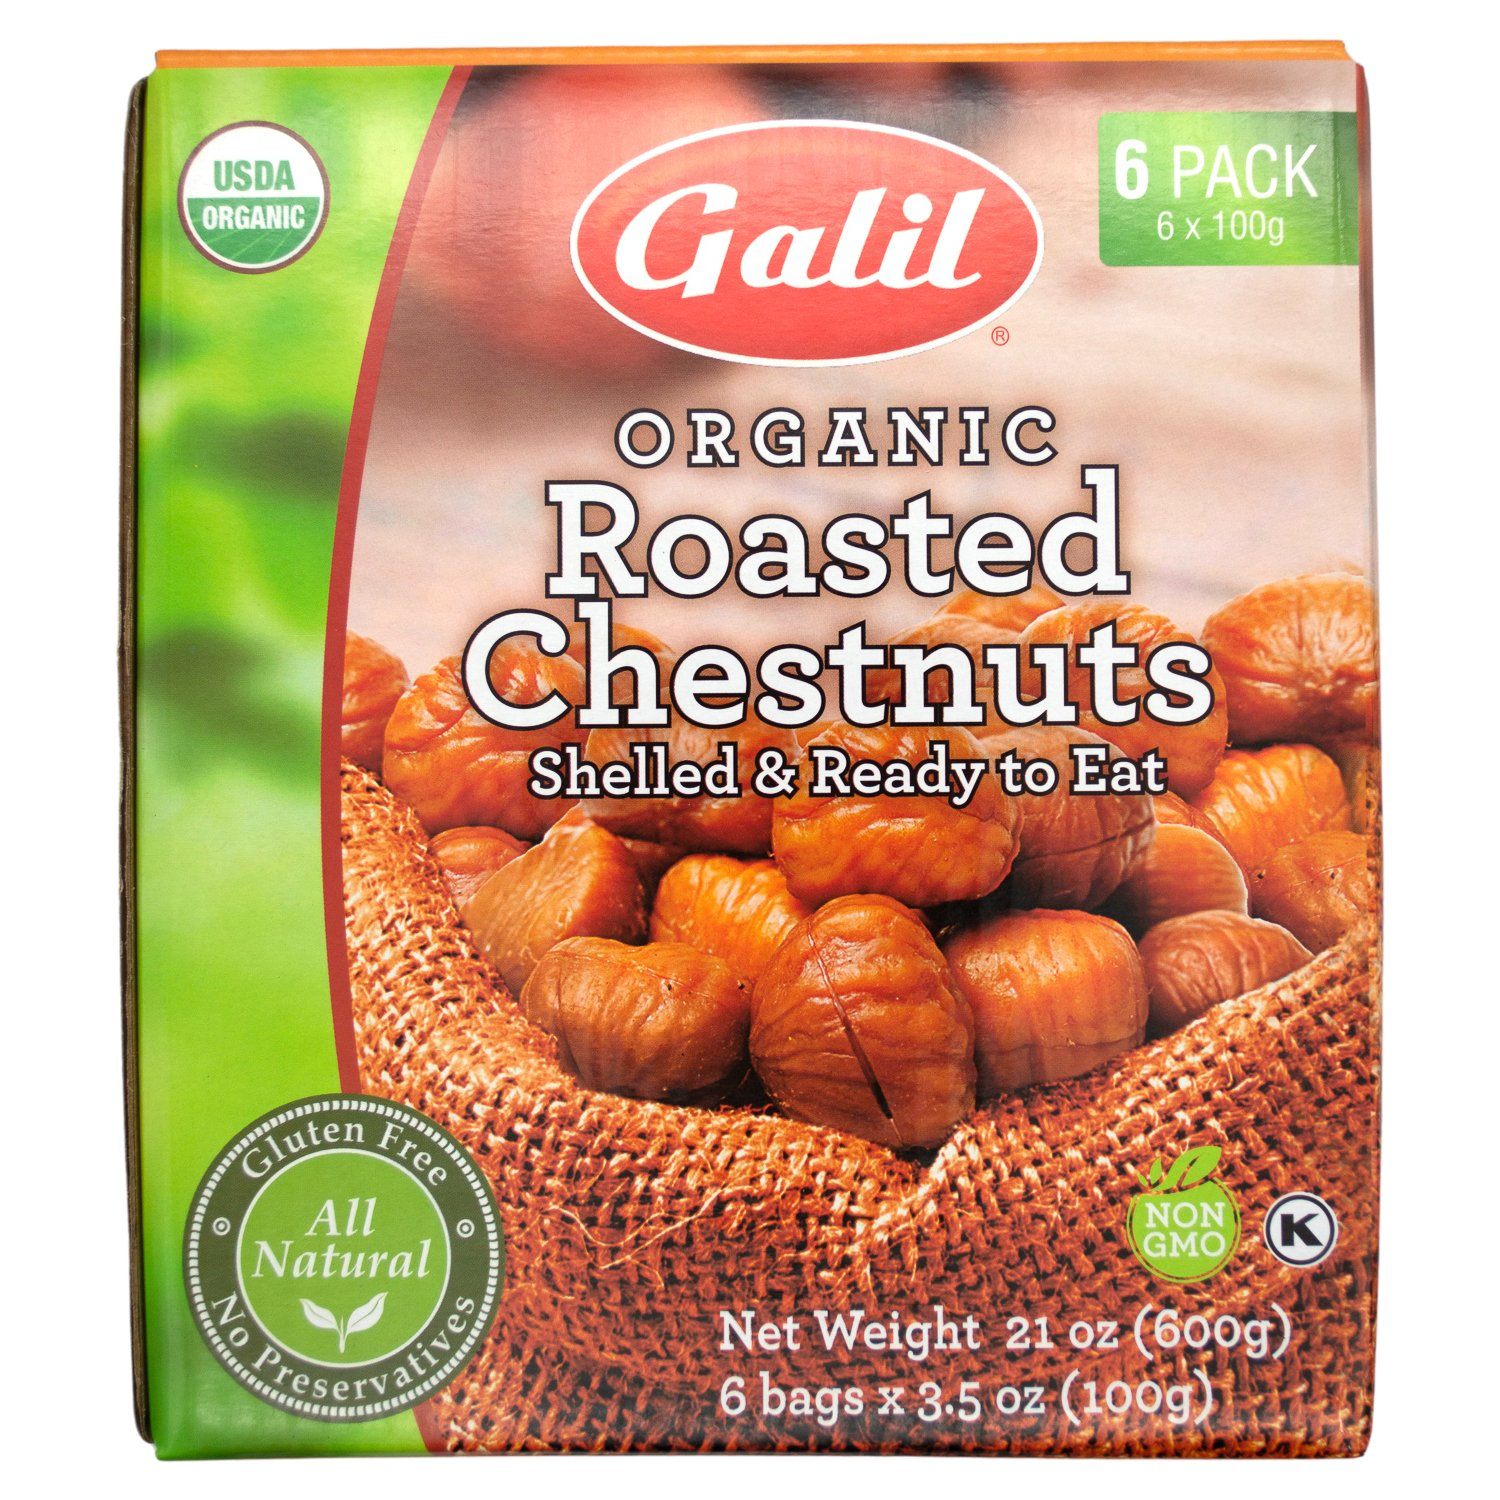 Galil Organic Roasted Chestnuts Galil Shelled 3.5 Oz-6 Count 